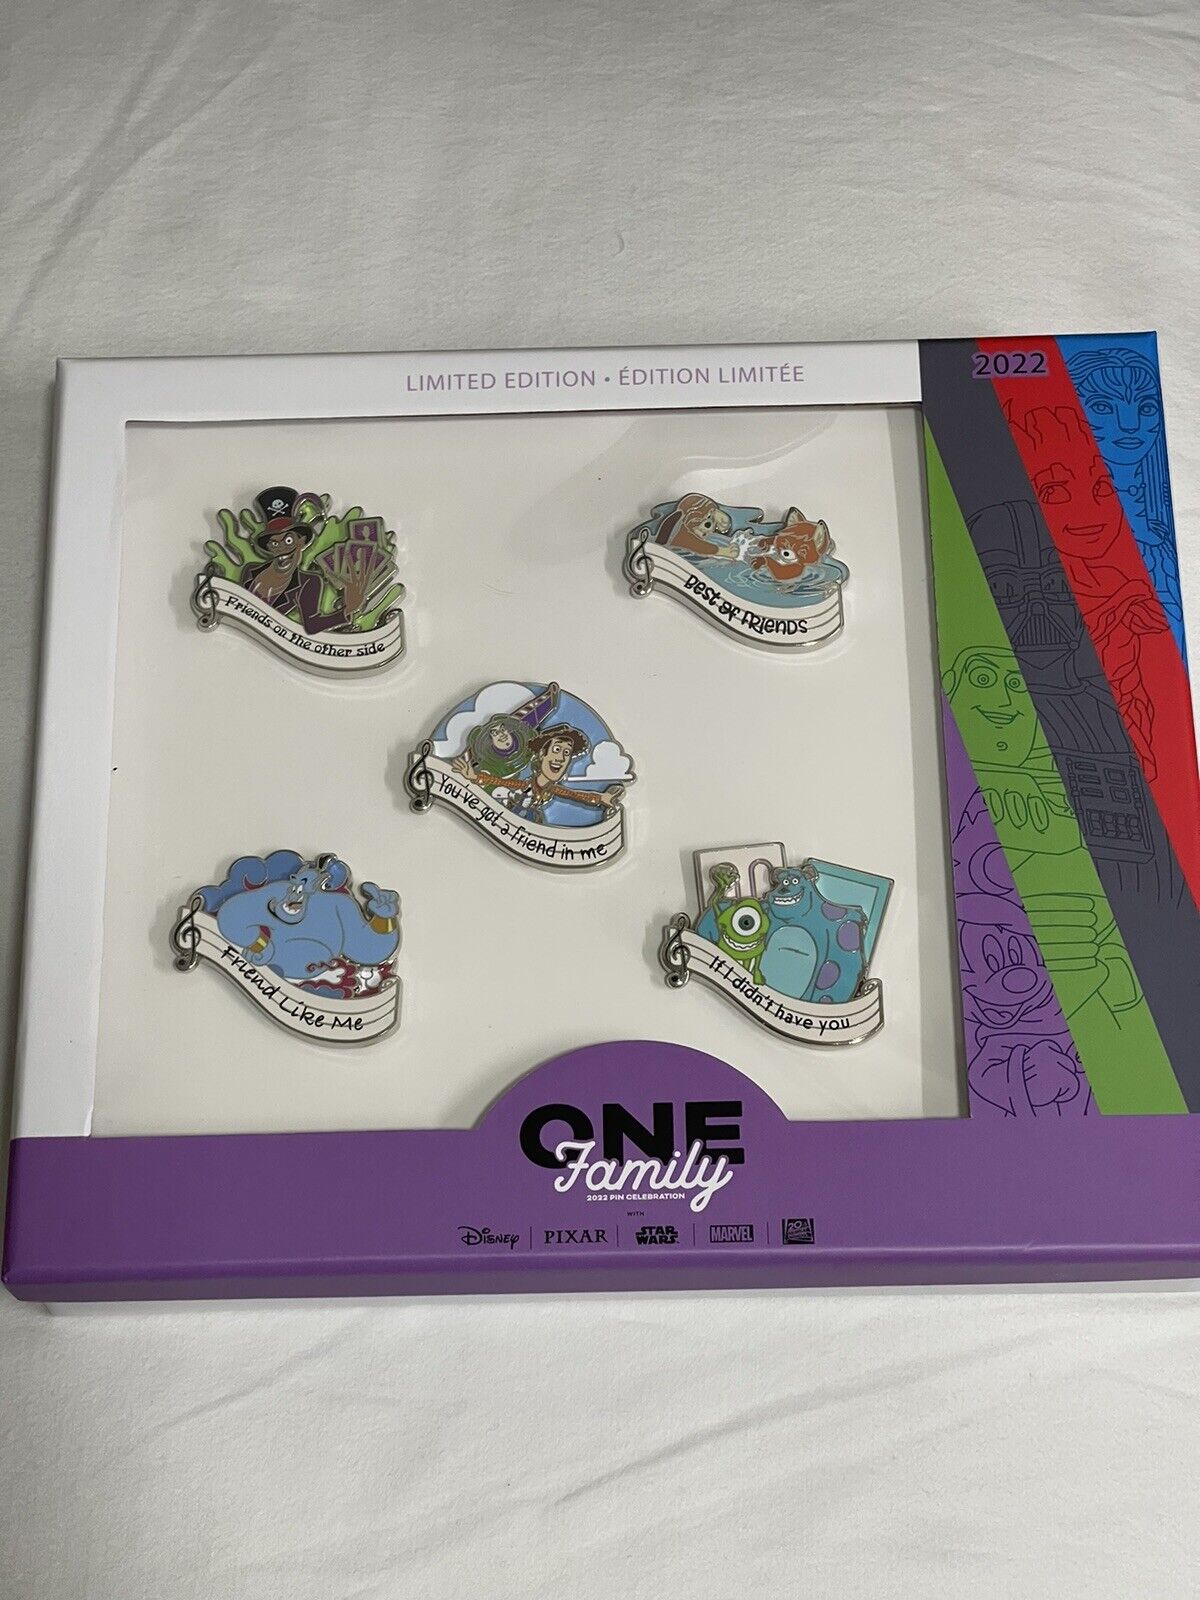 Disney One Family Pin Event Family Sing-A-Long Box LE 300 pin. 5 Pins Included.